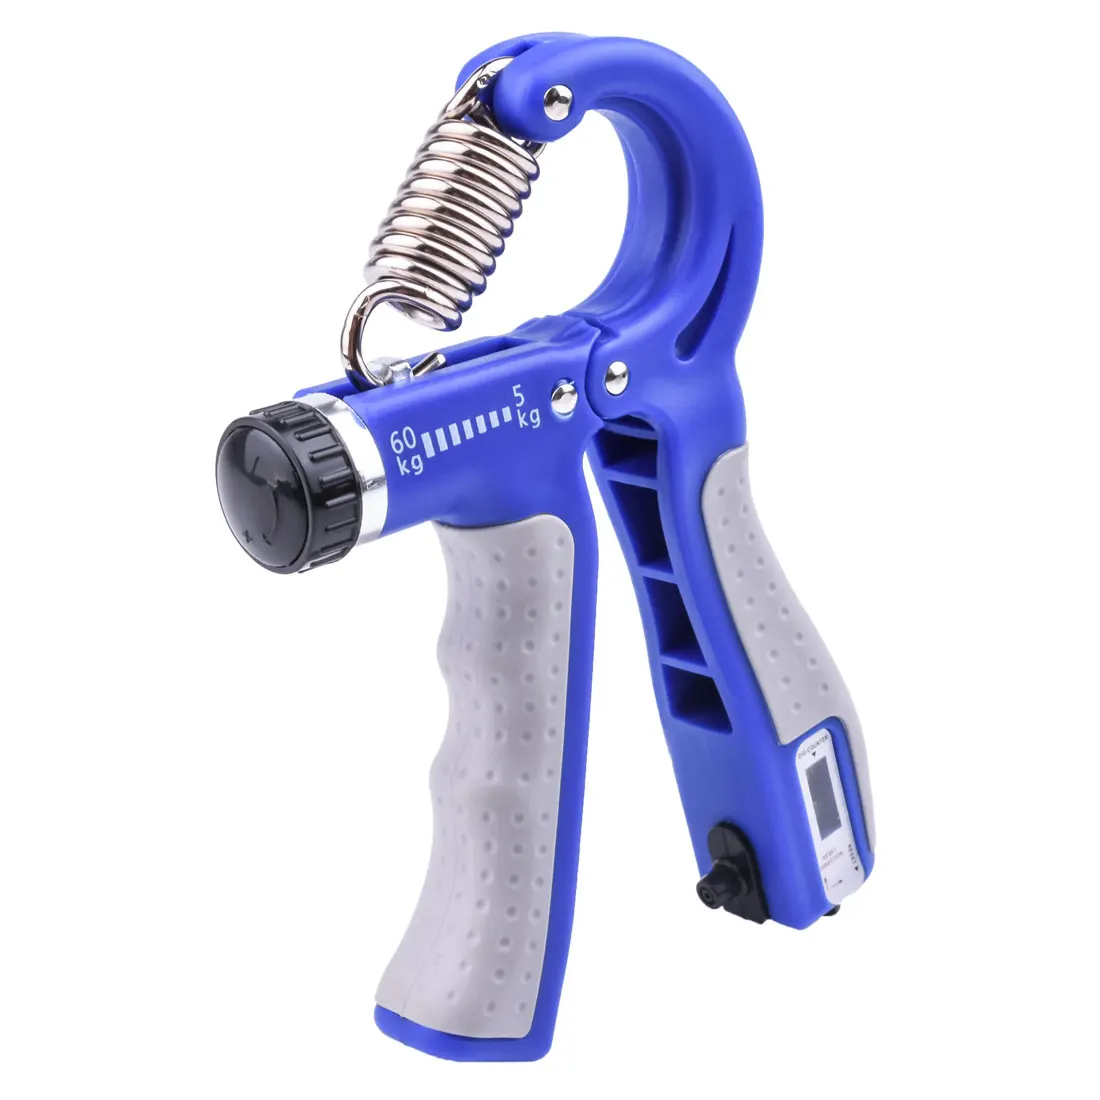 Hand Grip Strengthener Counter Finger Exerciser Grip Workout Strength Muscle Trainer Recovery Handles Wrist Gym Equipment